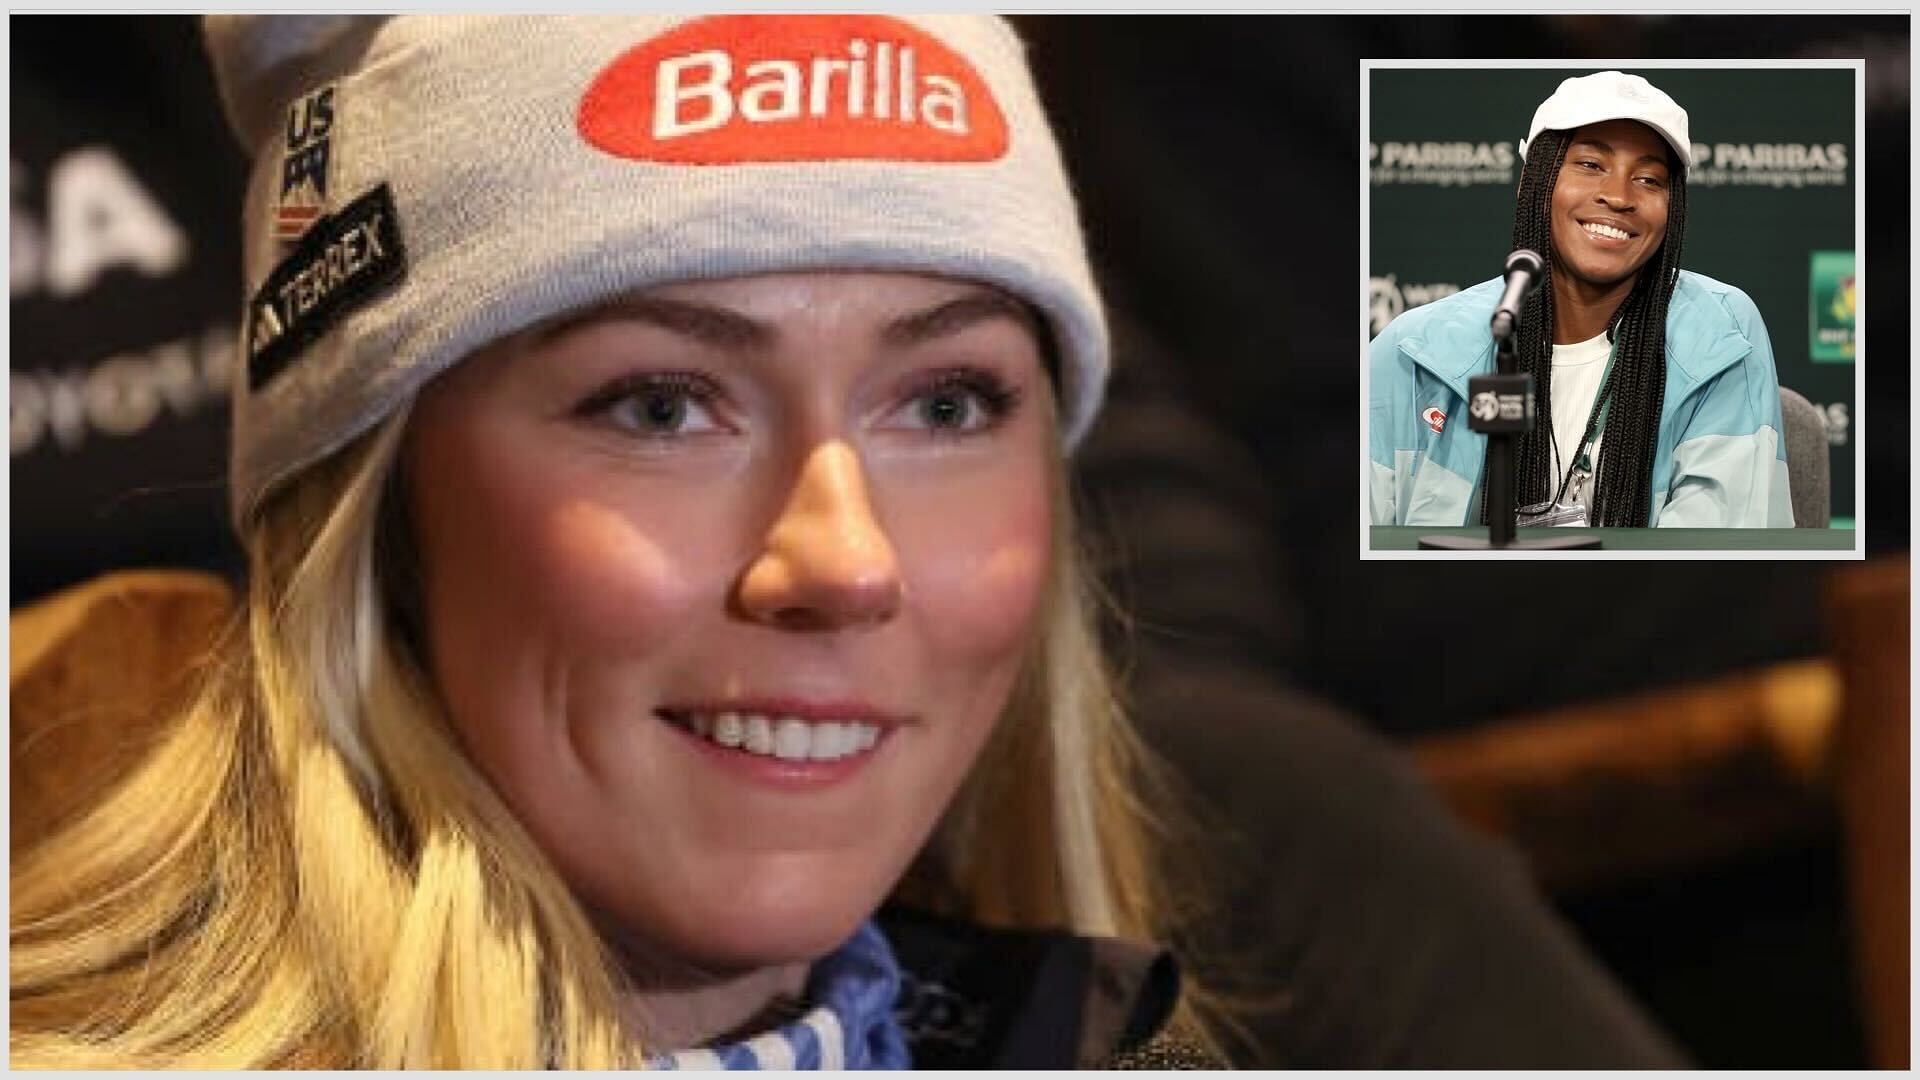 Mikaela Shiffrin congratulated Coco Gauff for being named in TIME magazine